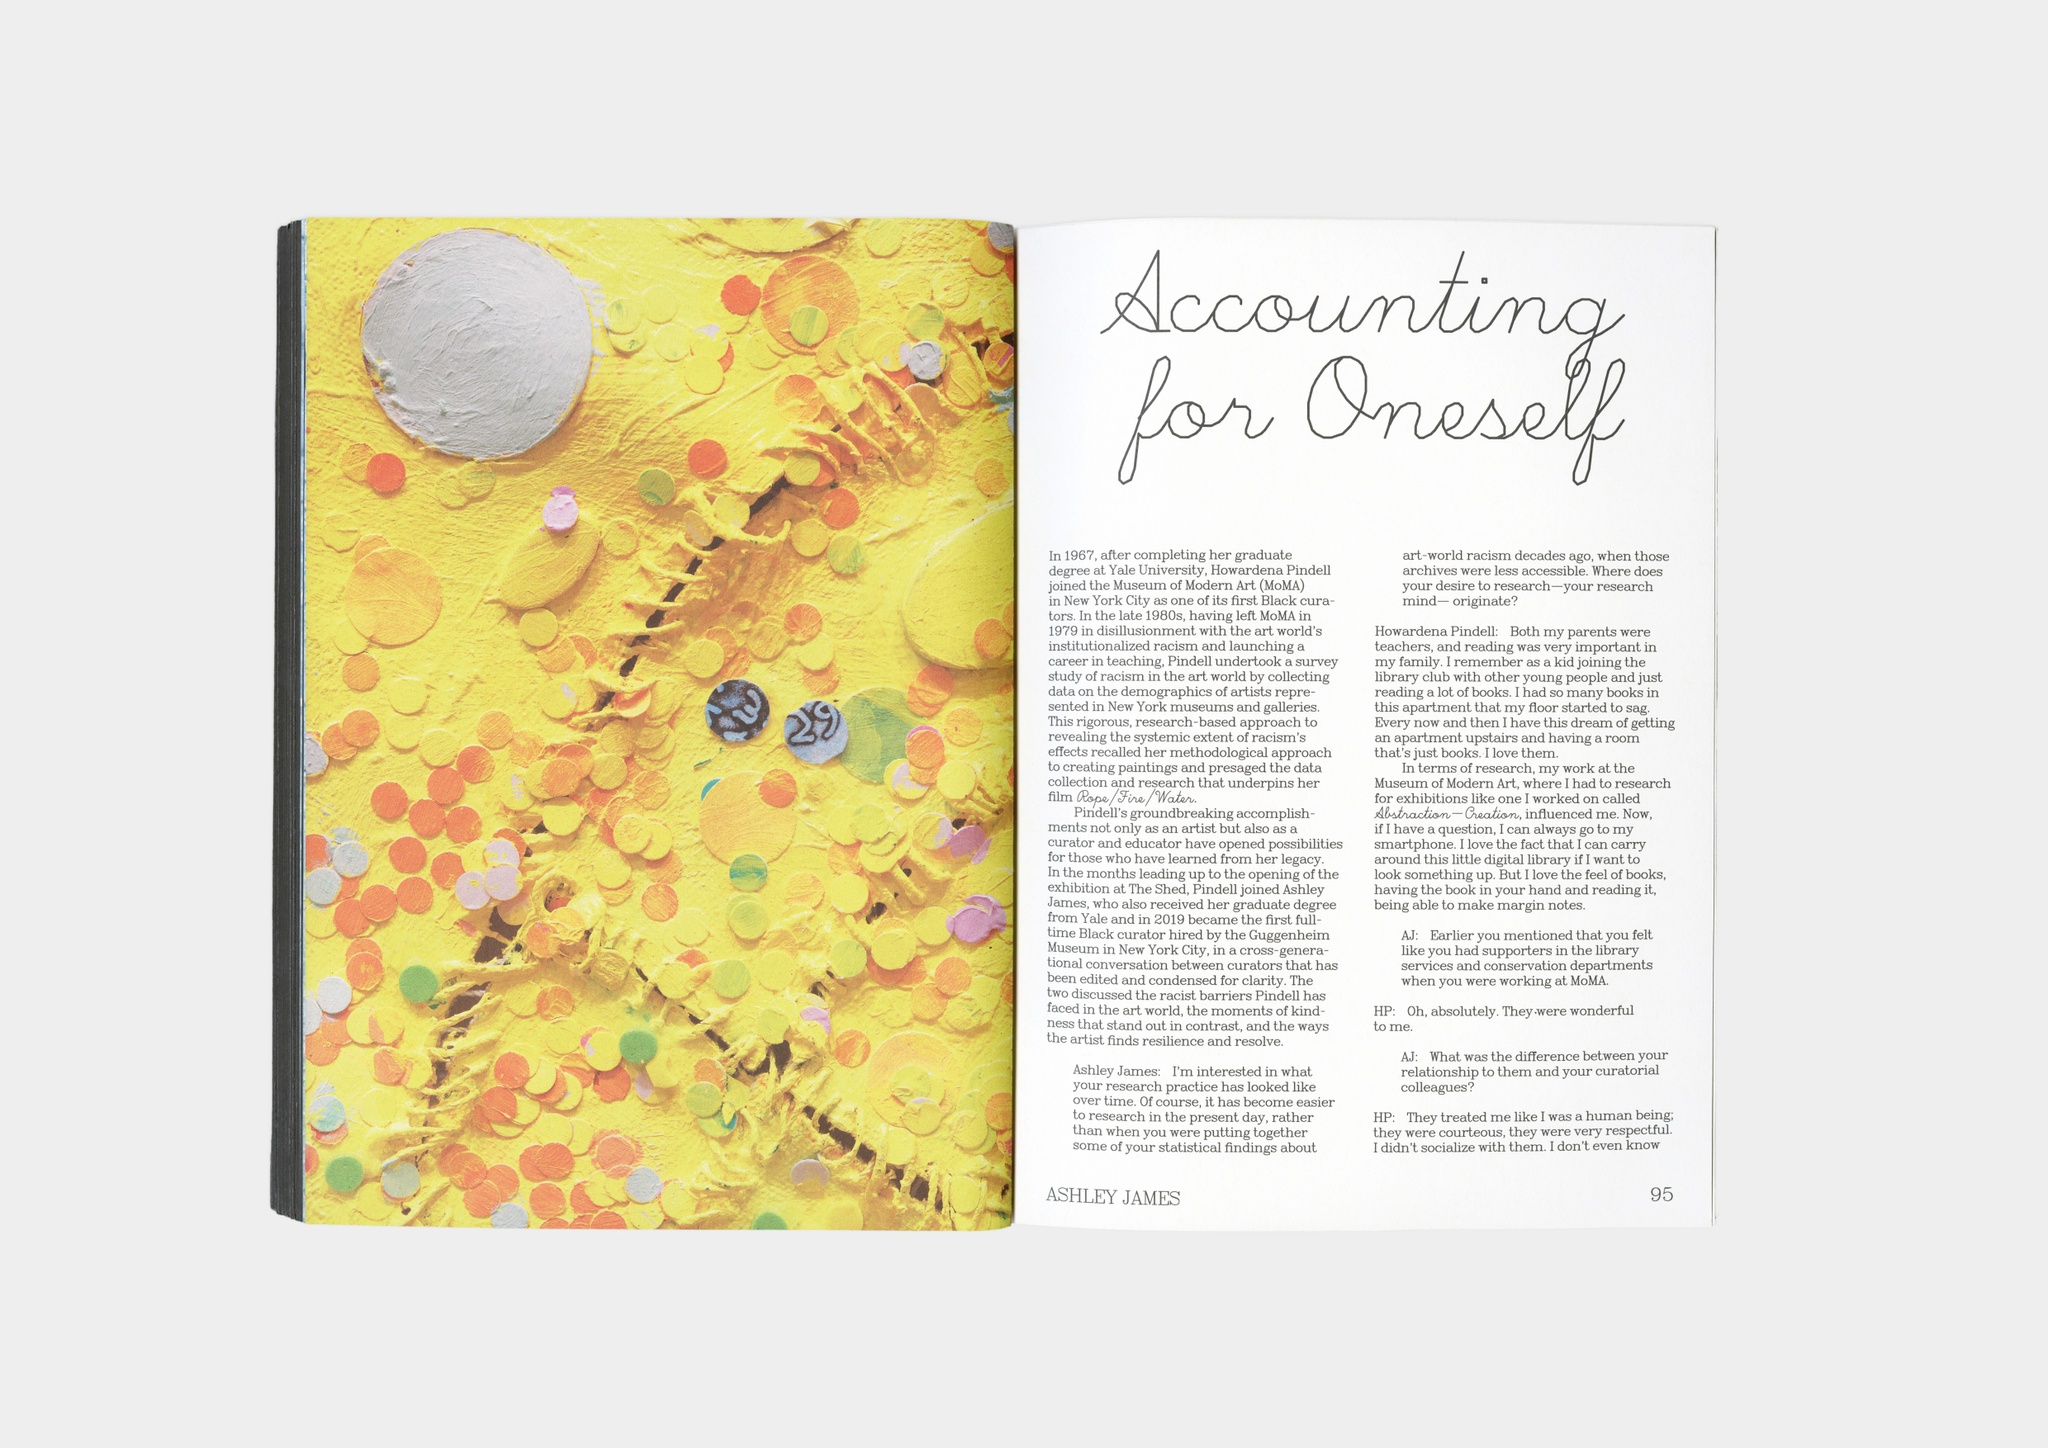 A spread of the catalogue "Howardena Pindell: Rope/Fire/Water". On the left is a full-bleed detail image of a yellow abstract painting with multicolored dots and suture-like stitiching. On the right, an essay title sits in script at the top of the page reading "Accounting for Oneself" with the author's name, Ashley James, at the bottom.